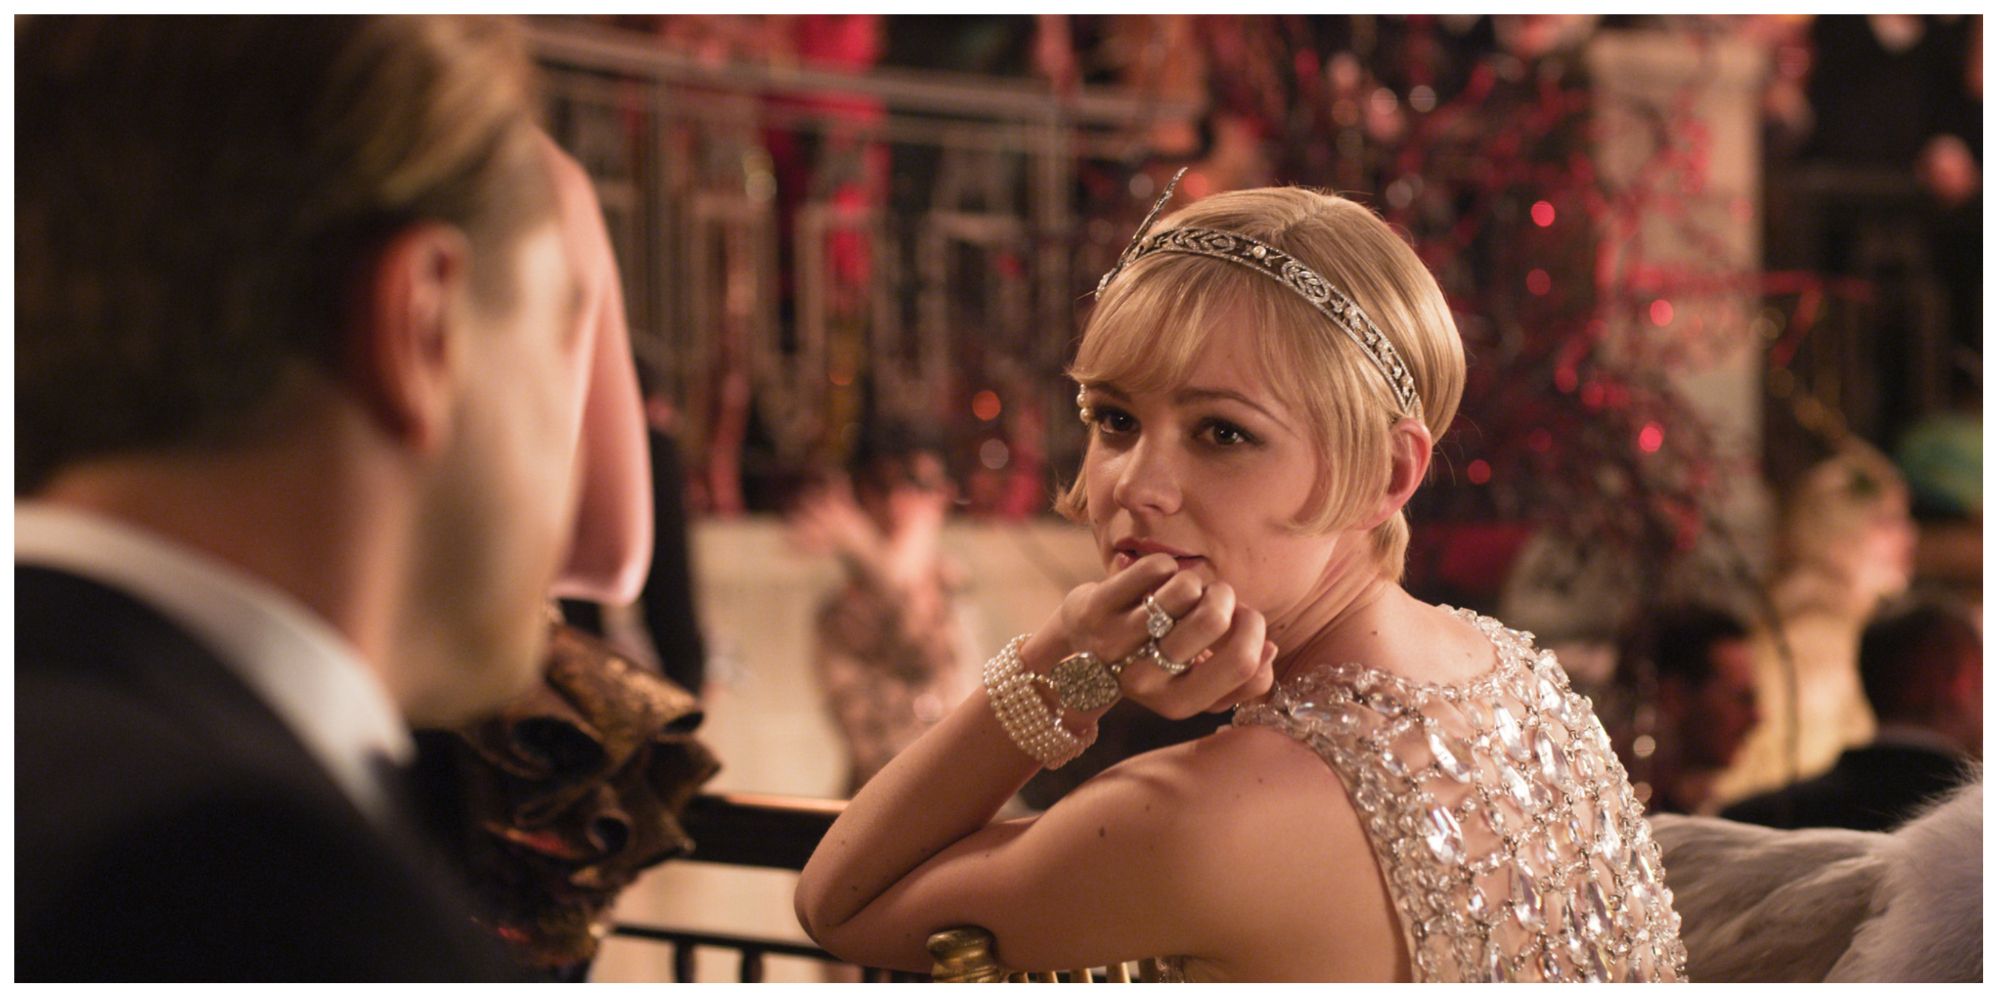 Carey Mulligan as Daisy in The Great Gatsby looking at Gatsby (offscreen)